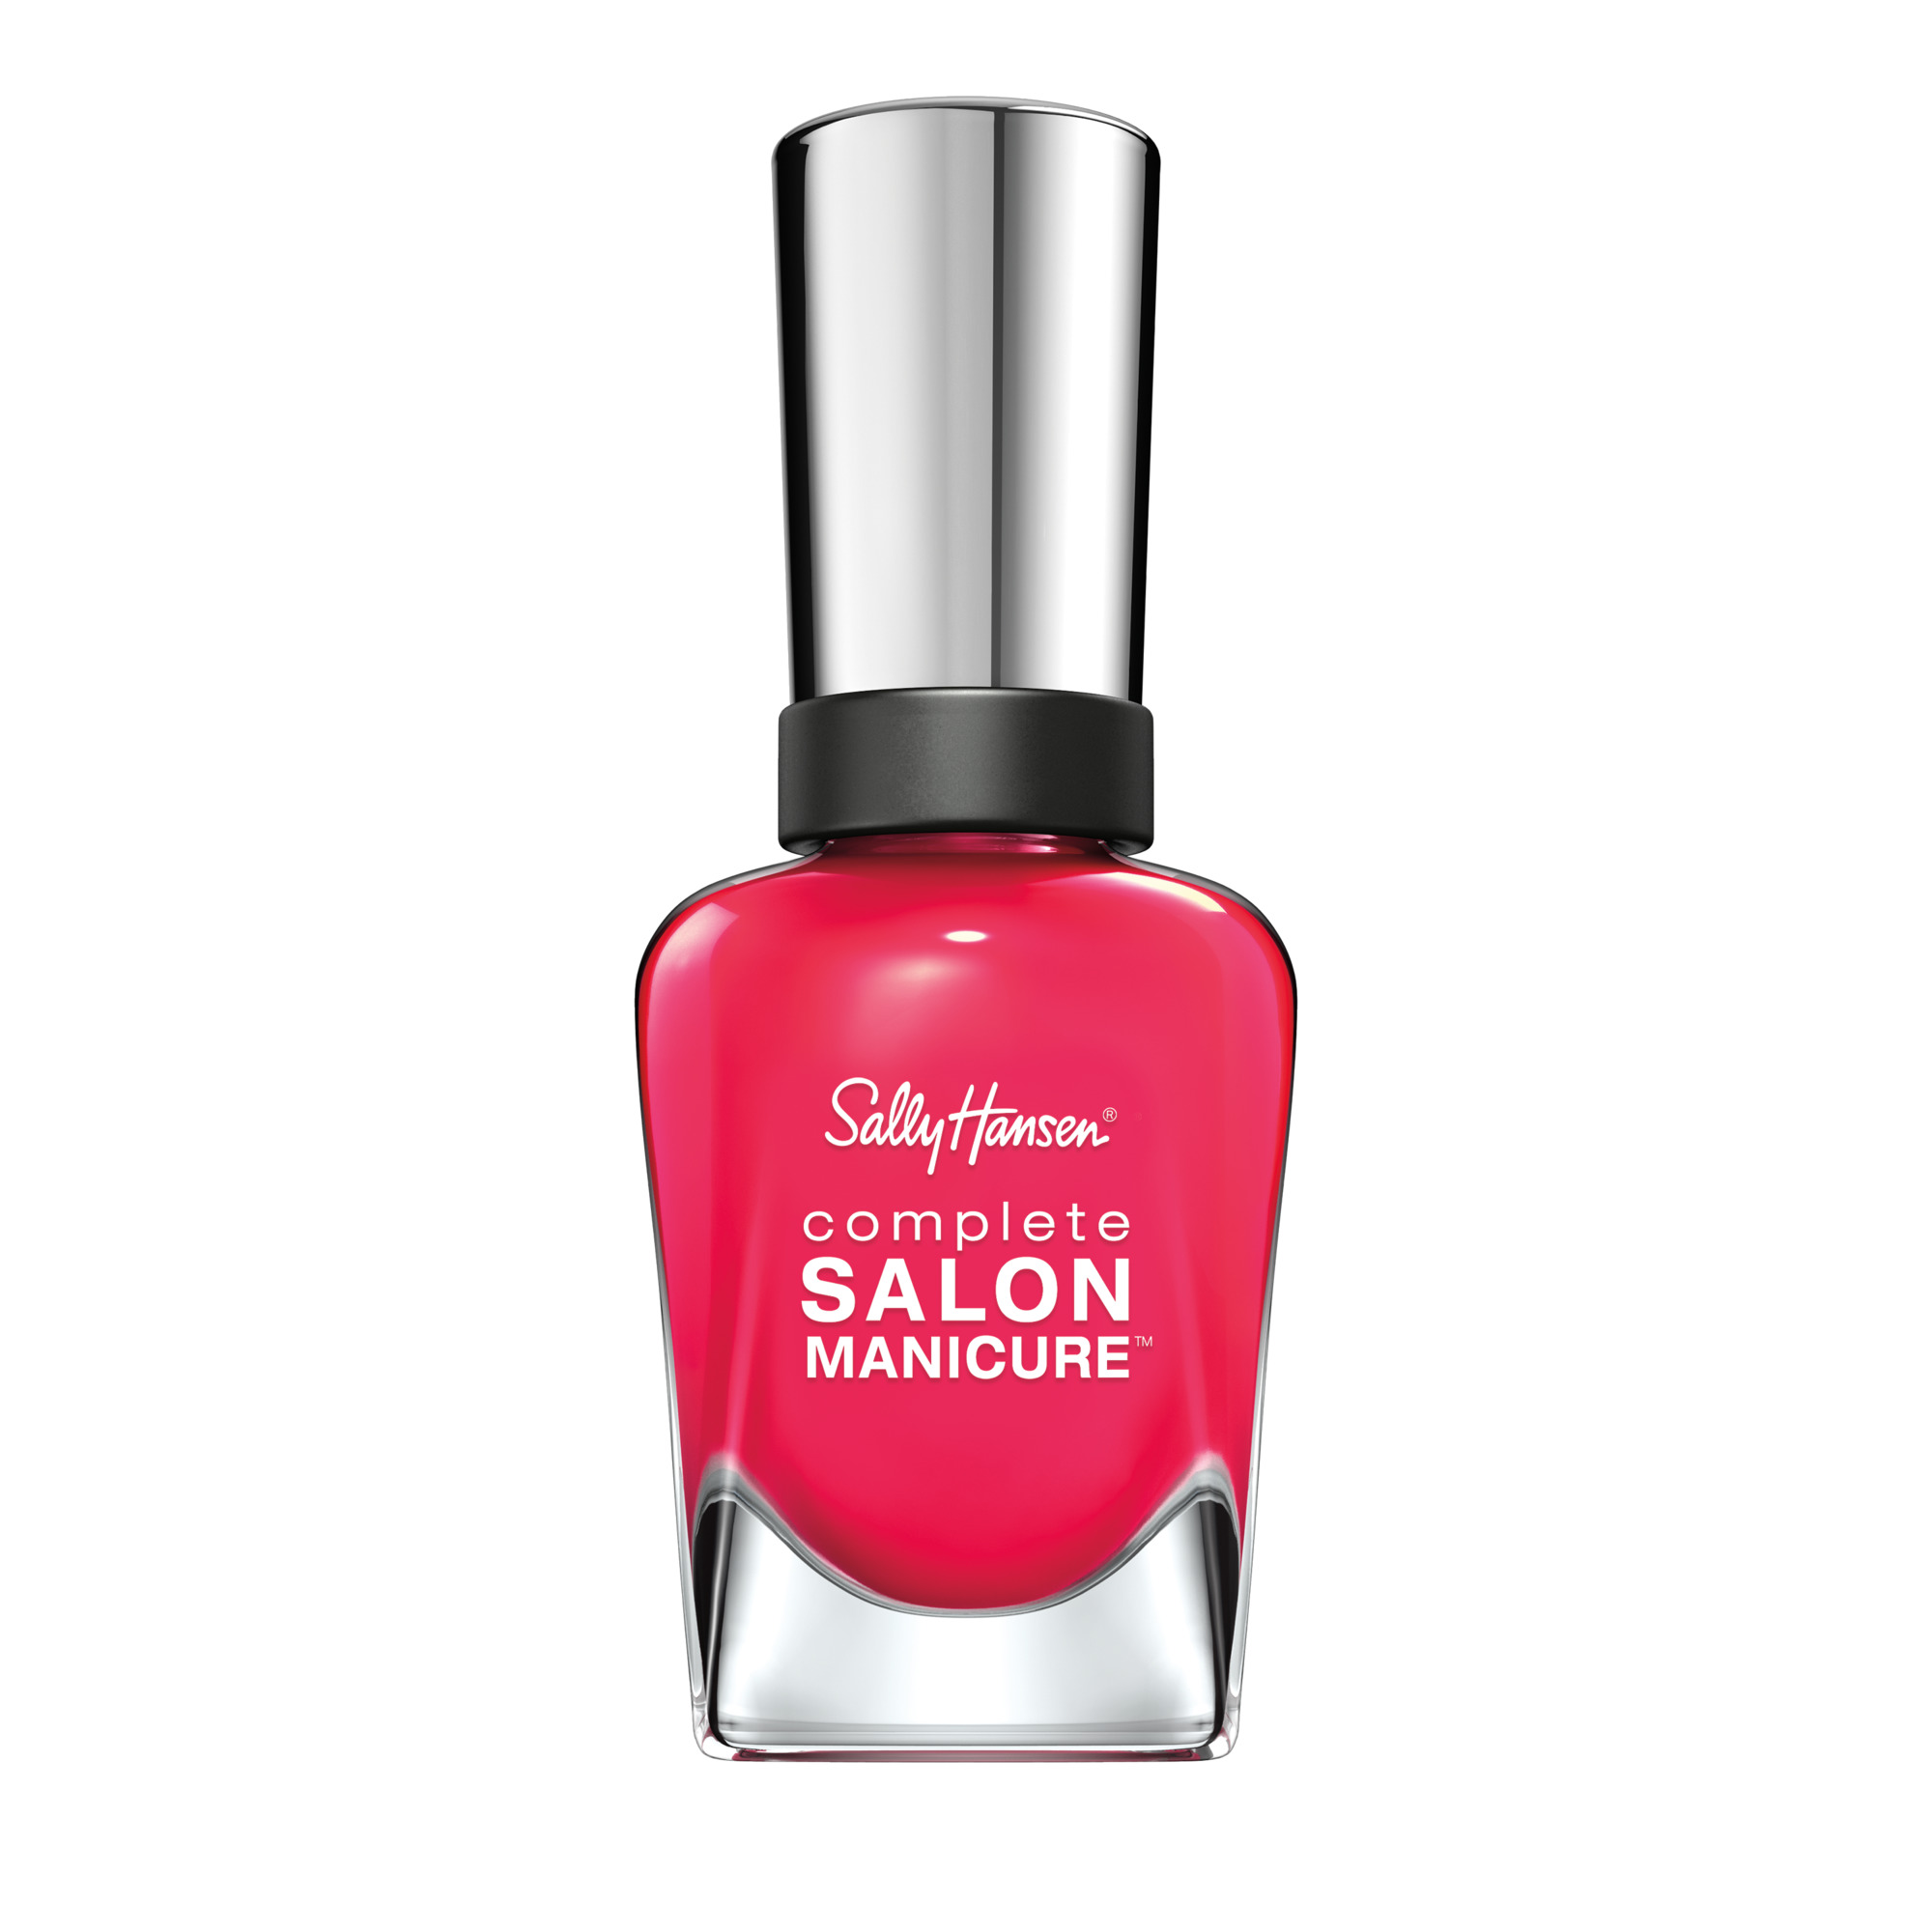 Sally Hansen Complete Salon Manicure Nail Color, Tickle Me Pink - image 1 of 15